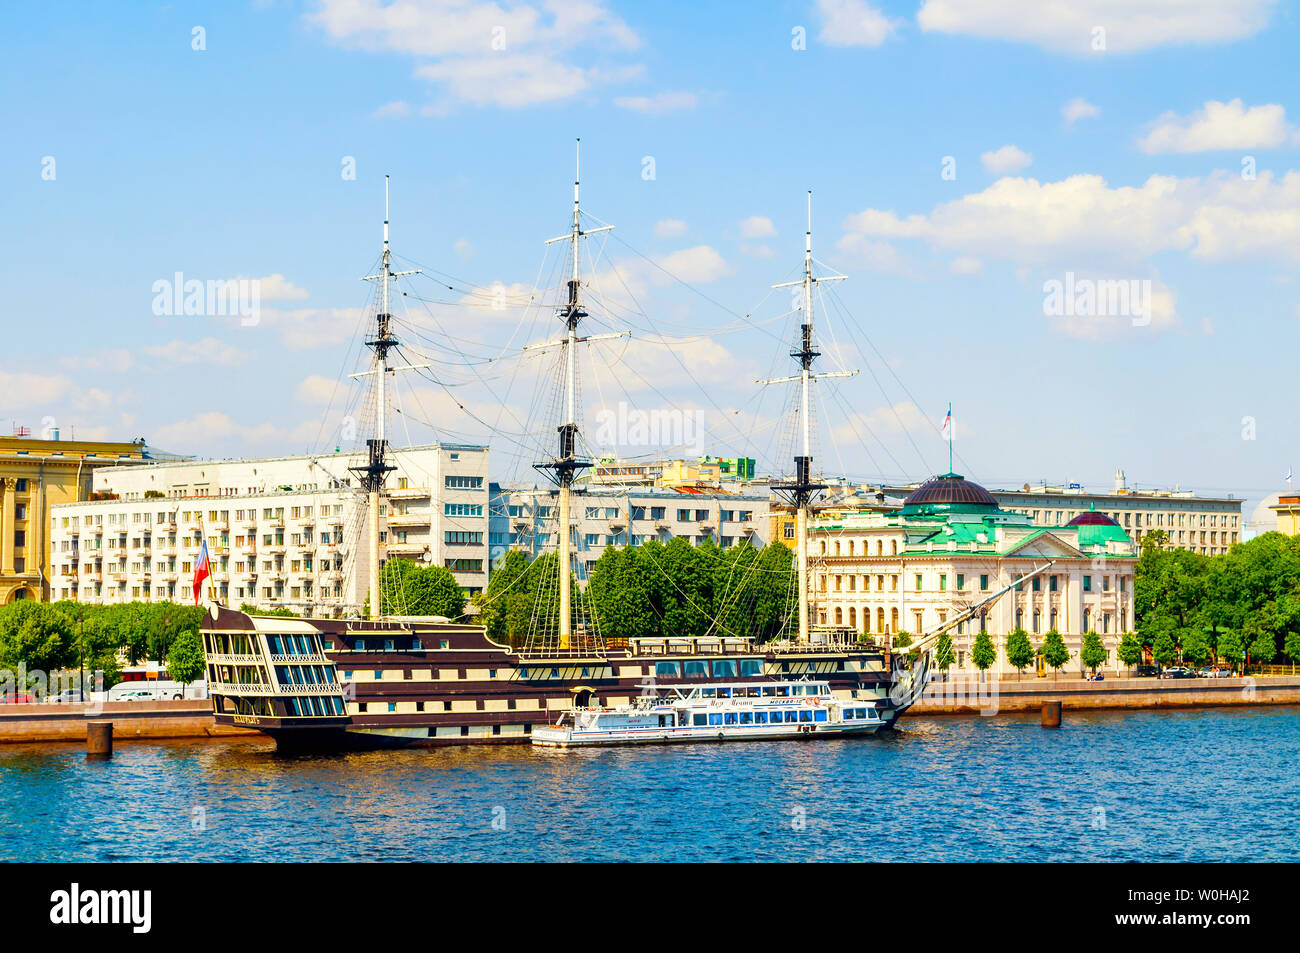 St Petersburg, Russia - June 6, 2019.Petrovsky embankment, Neva river and frigate Grace in St Petersburg, Russia.Frigate is a historical reconstructio Stock Photo